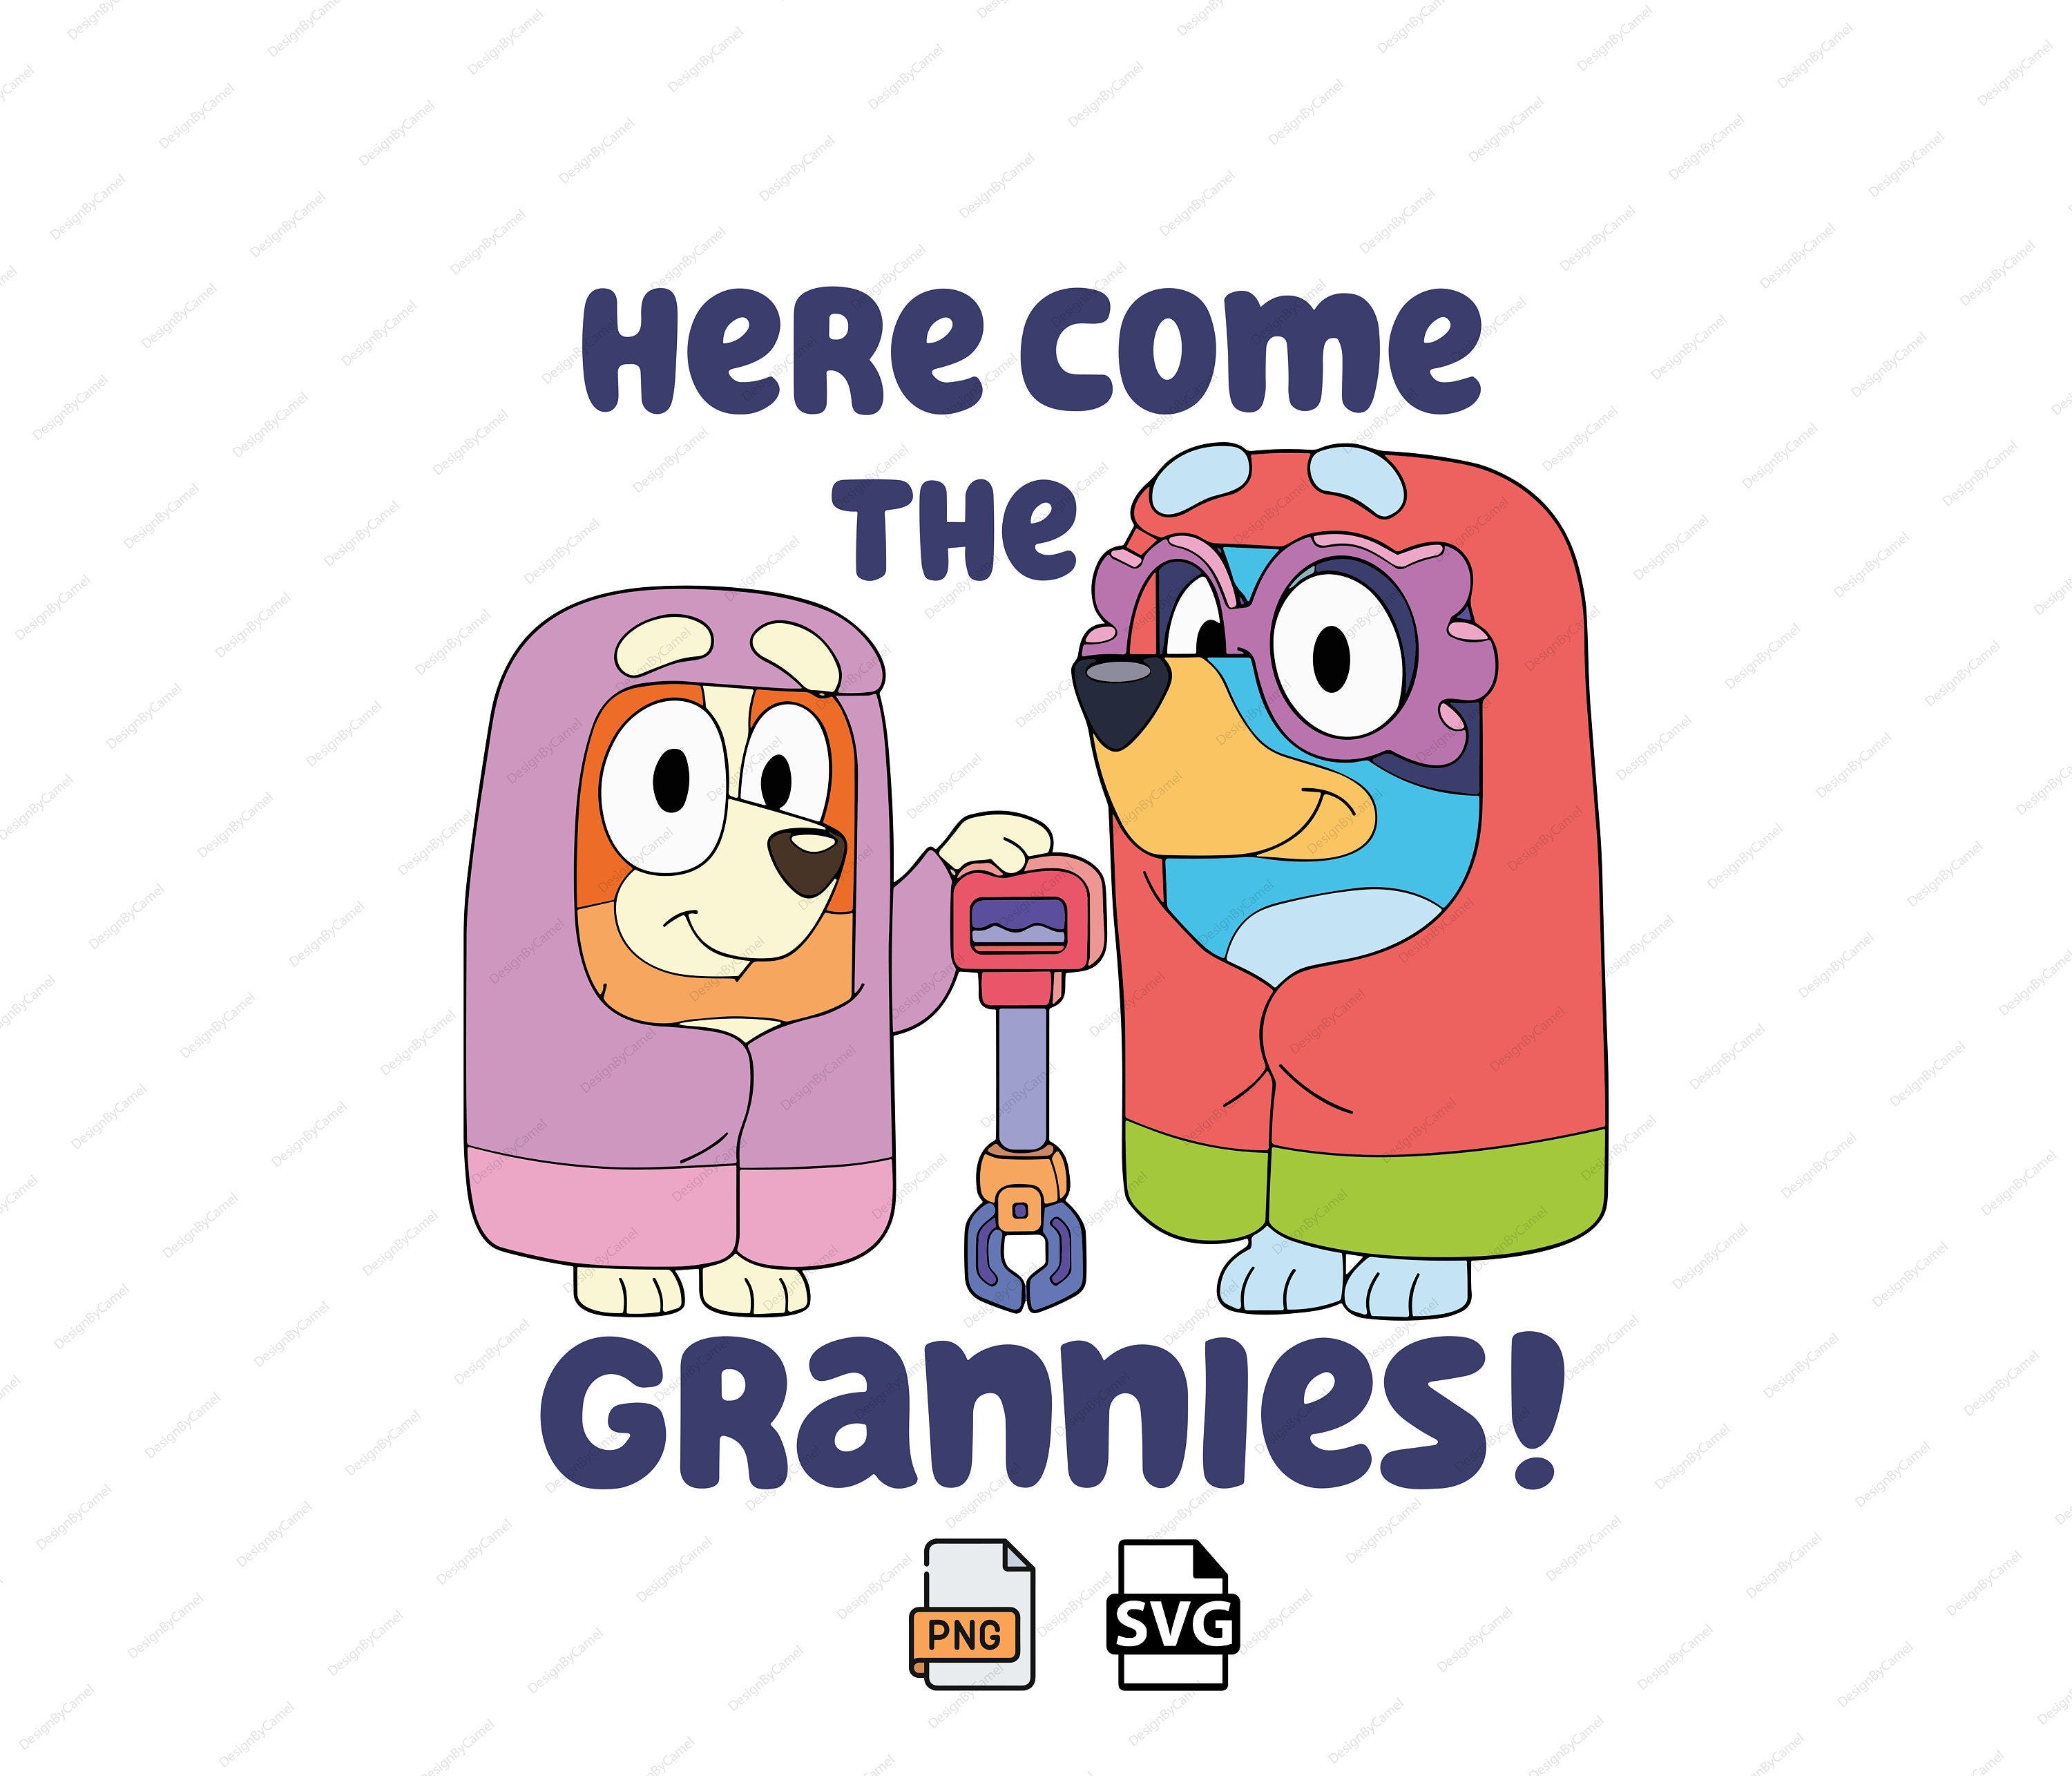 Here Come The Grannies Png, Puppy Grannies Png, Bluey Png, Bluey Svg, Bluey Png File,